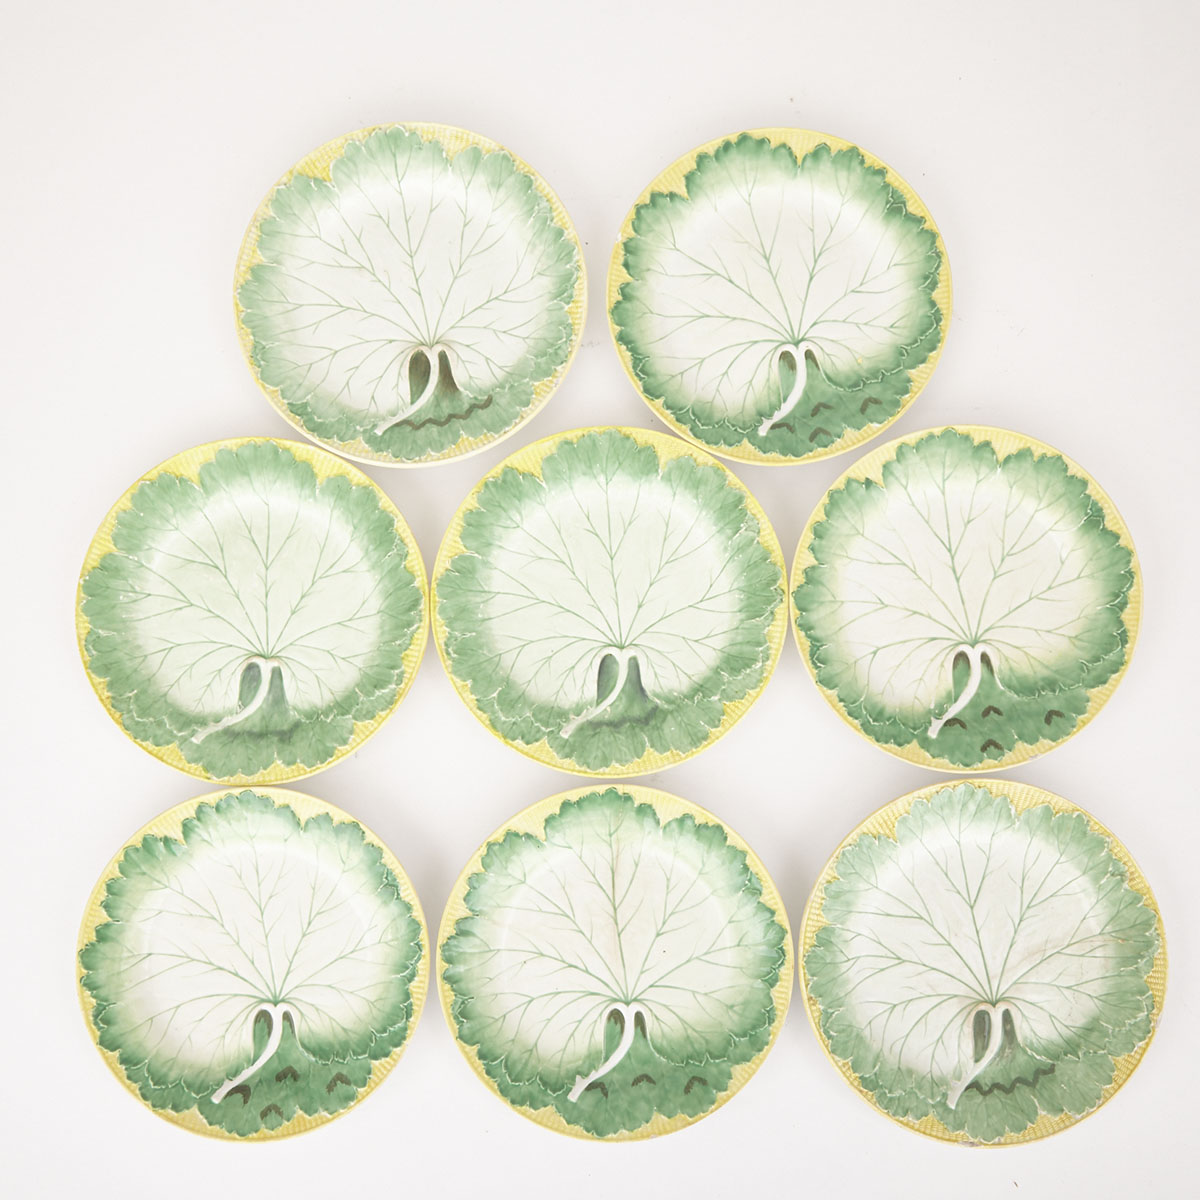 Eight Wedgwood Pearlware Cabbage Leaf Plates, 19th century